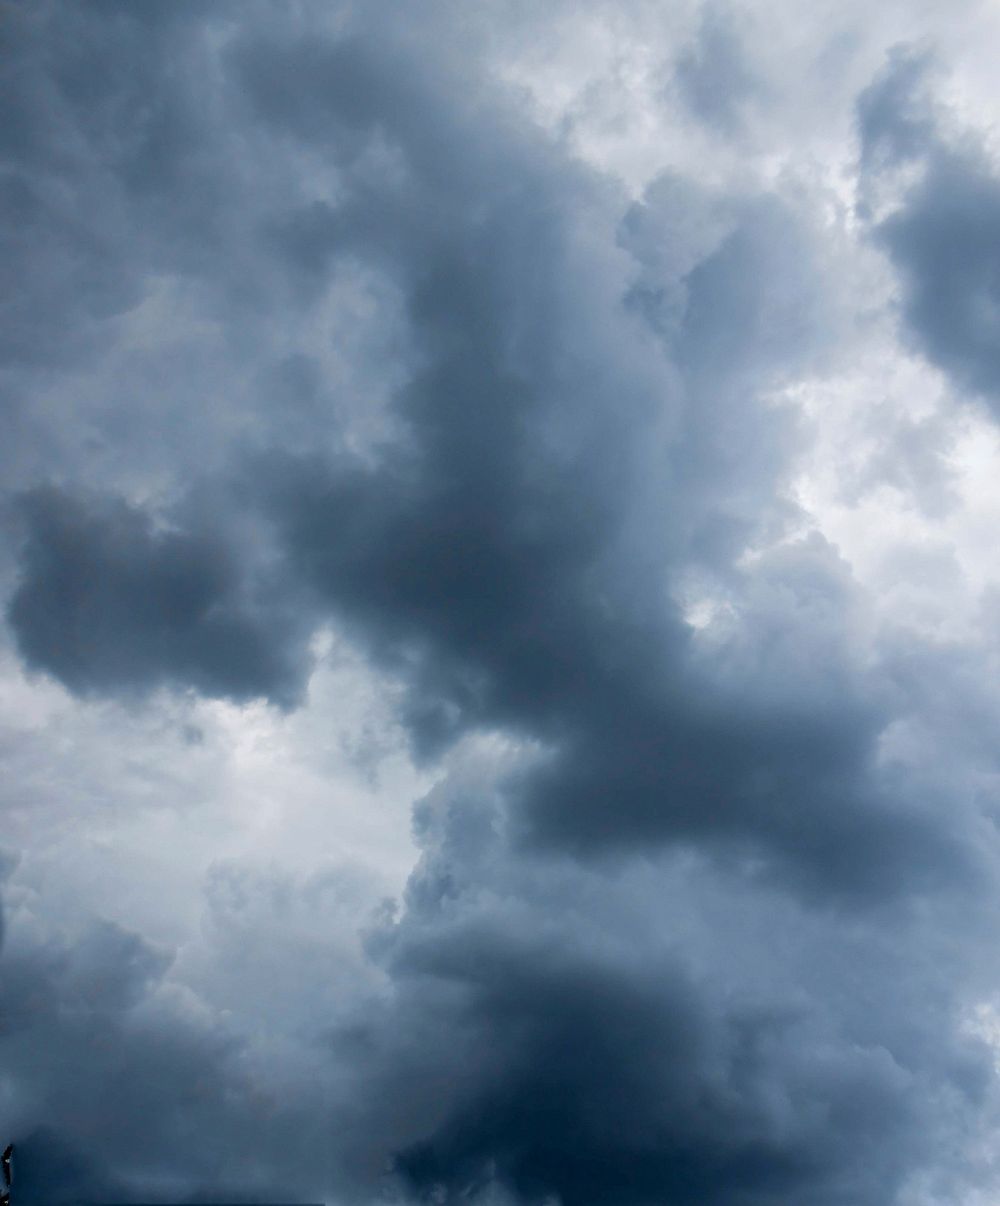 Cloudy stormy sky background. Free public domain CC0 photo.